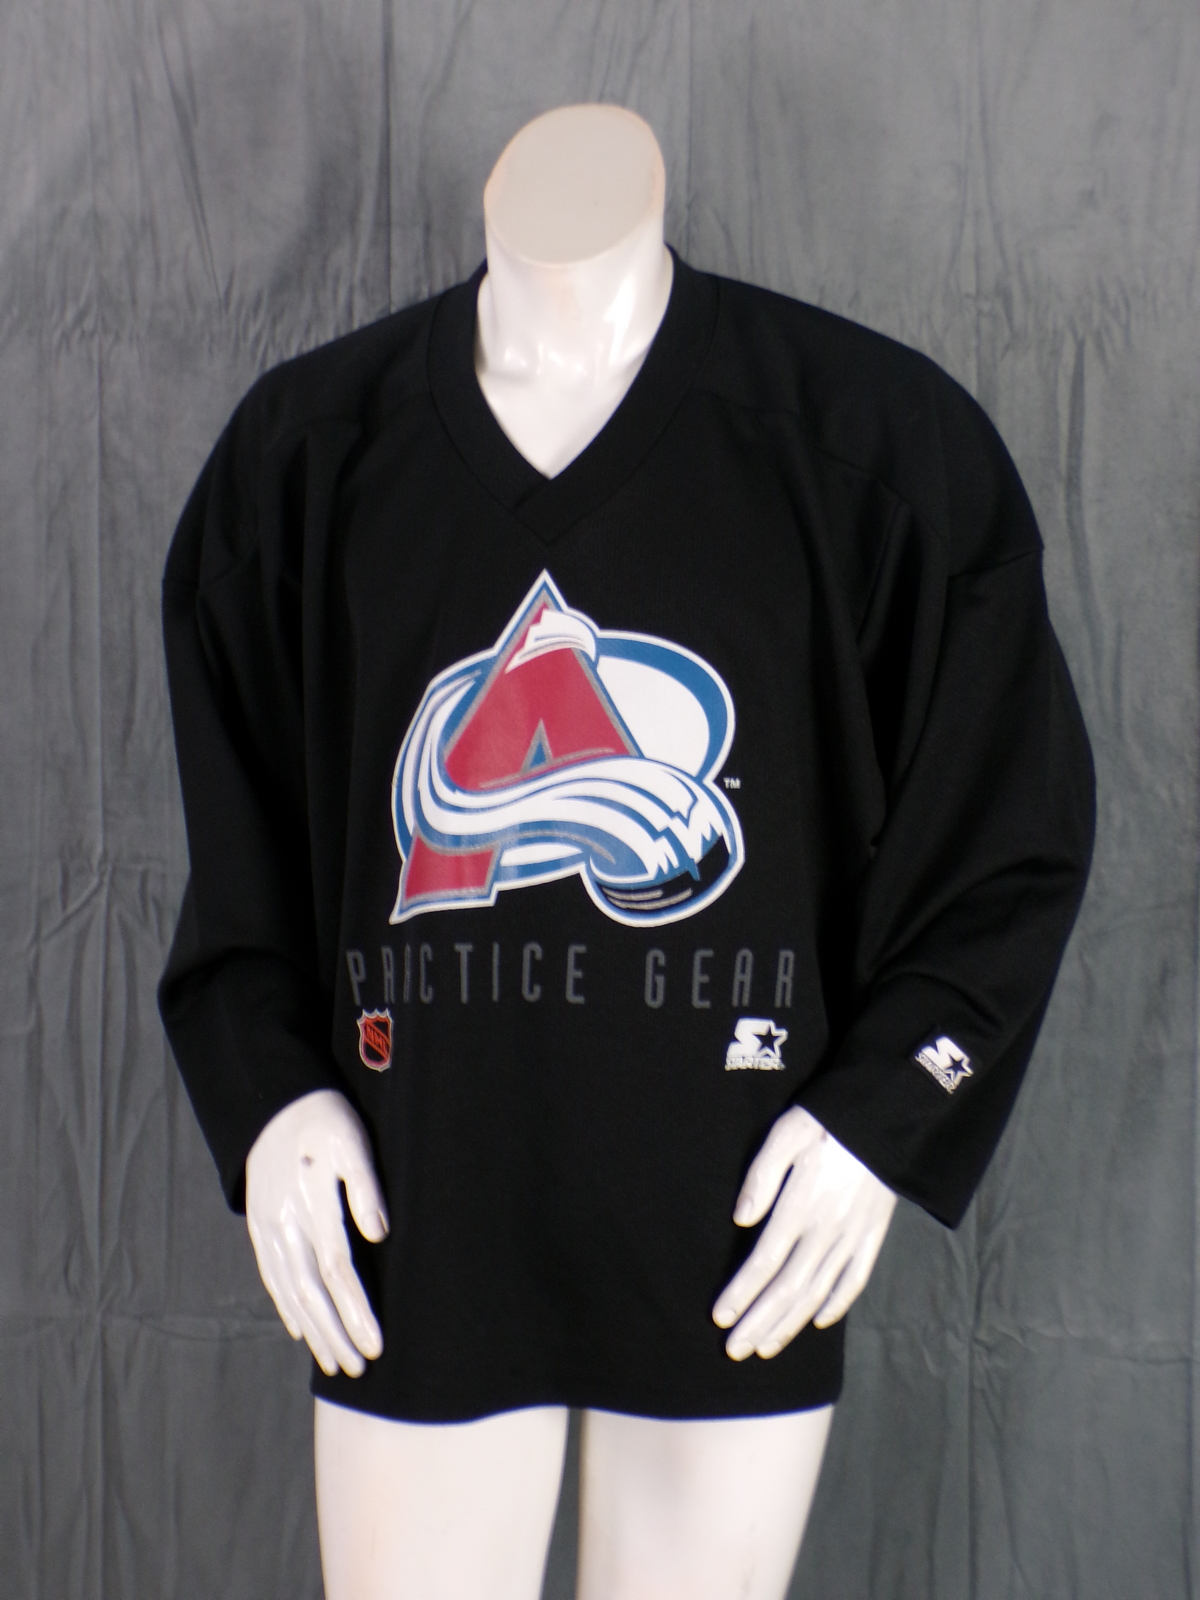 Primary image for Colorado Avalanche Jersey (VTG) - Practice Gear by Starter - Men's Large 